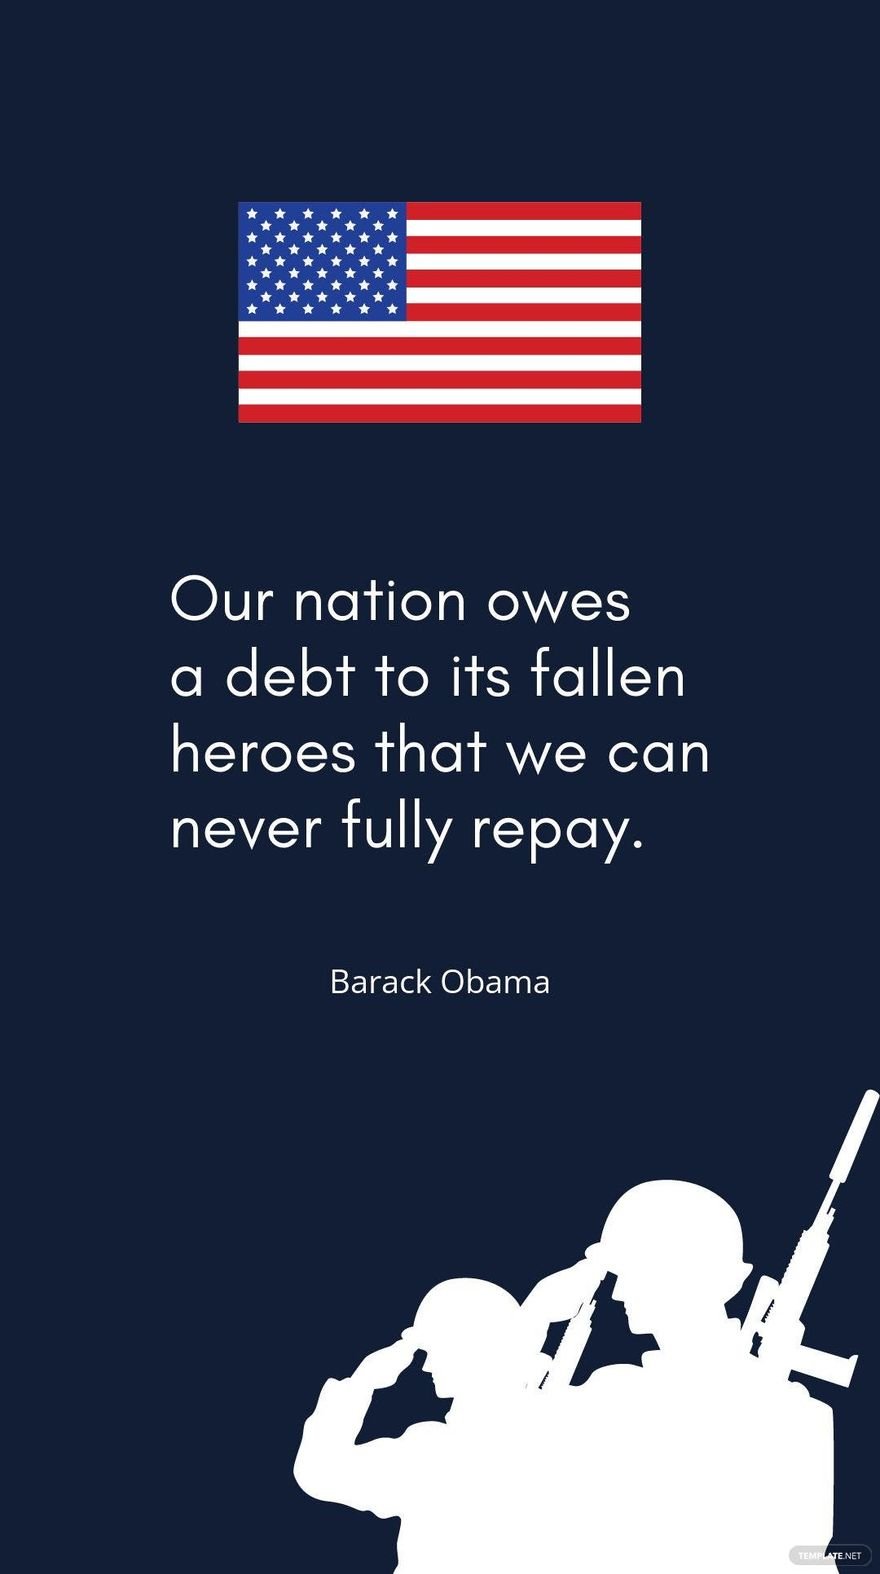 Barack Obama - Our nation owes a debt to its fallen heroes that we can never fully repay.